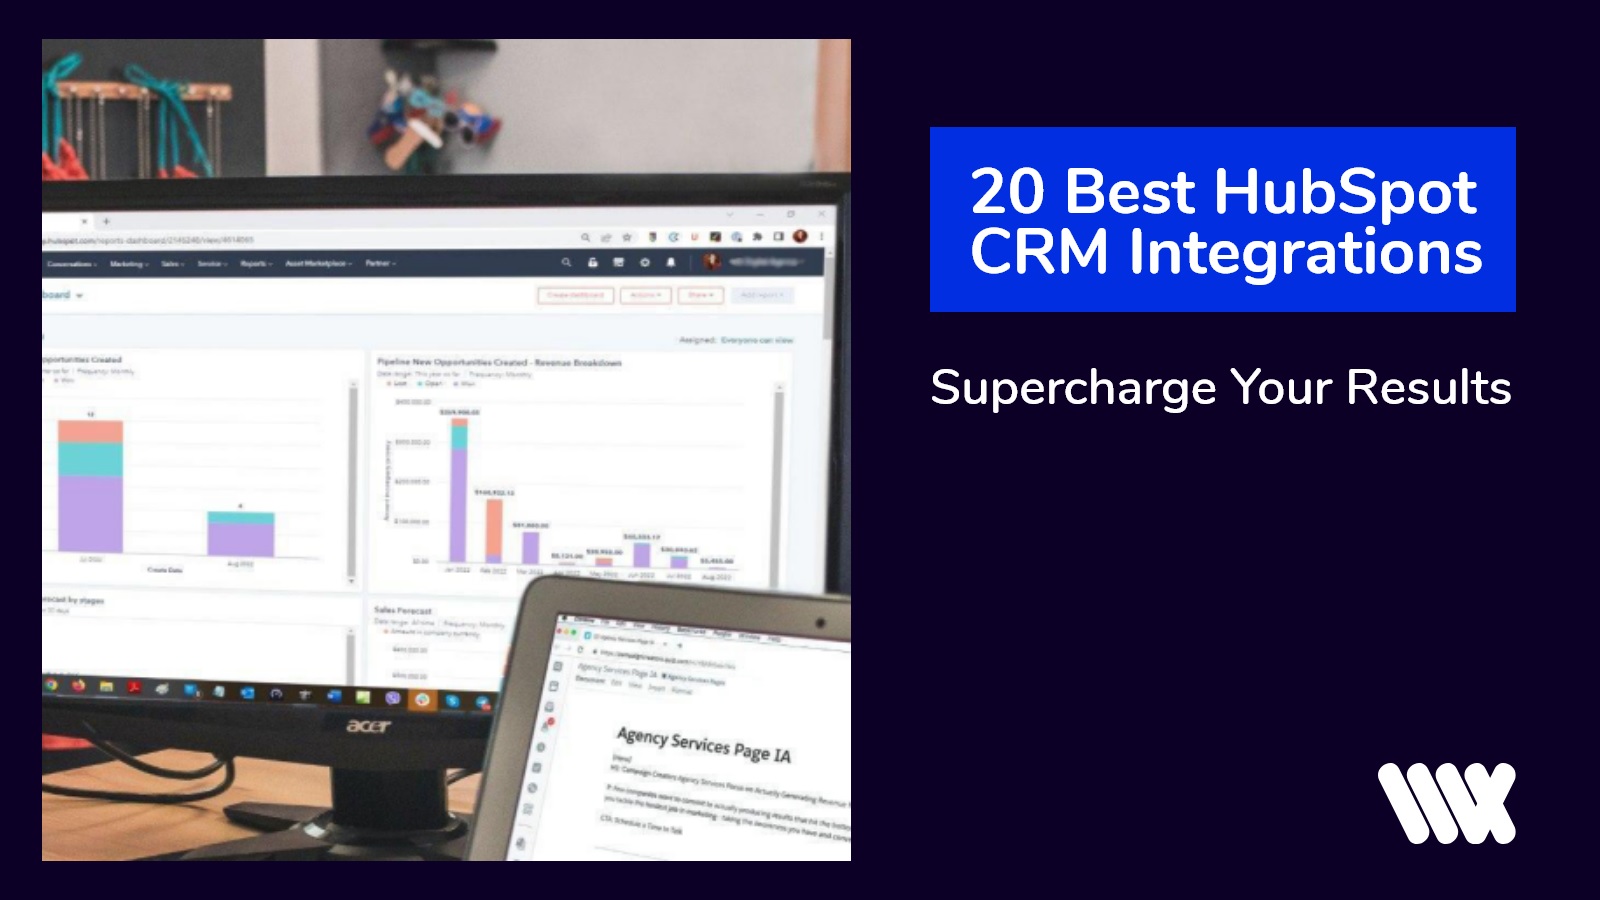 20 Best HubSpot CRM Integrations to Supercharge Your Results